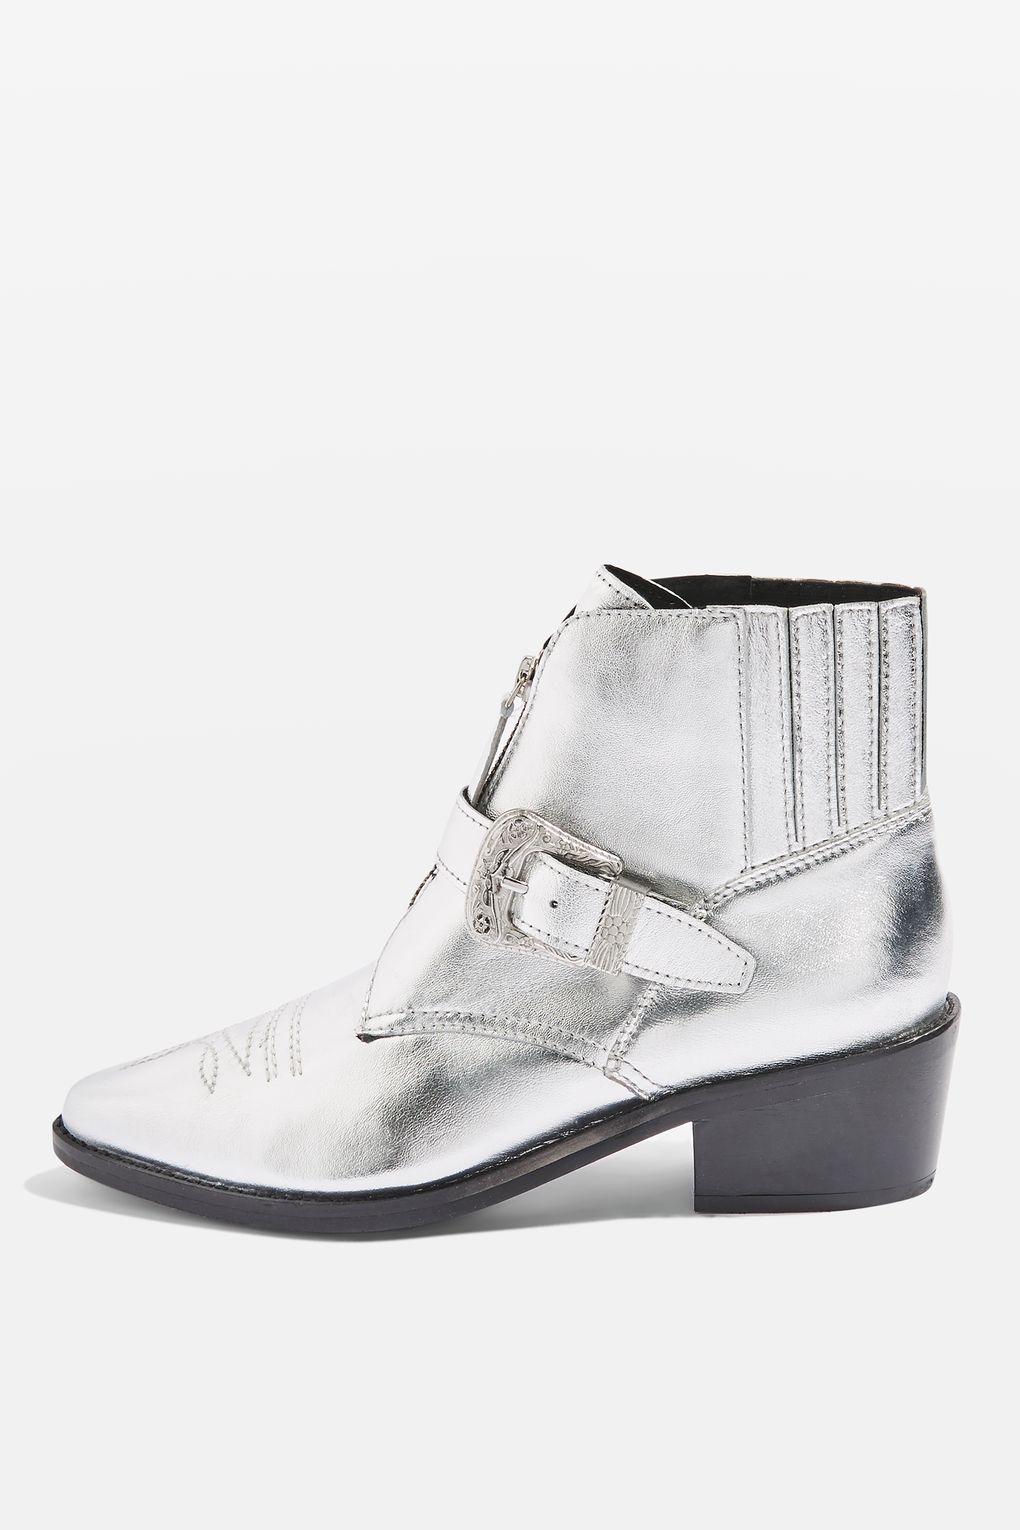 Topshop Leather Boots - £72